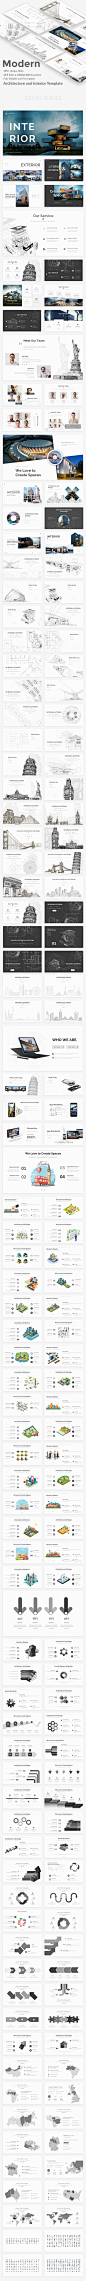 Modern - Architecture and Interior Powerpoint Template - Creative PowerPoint Templates